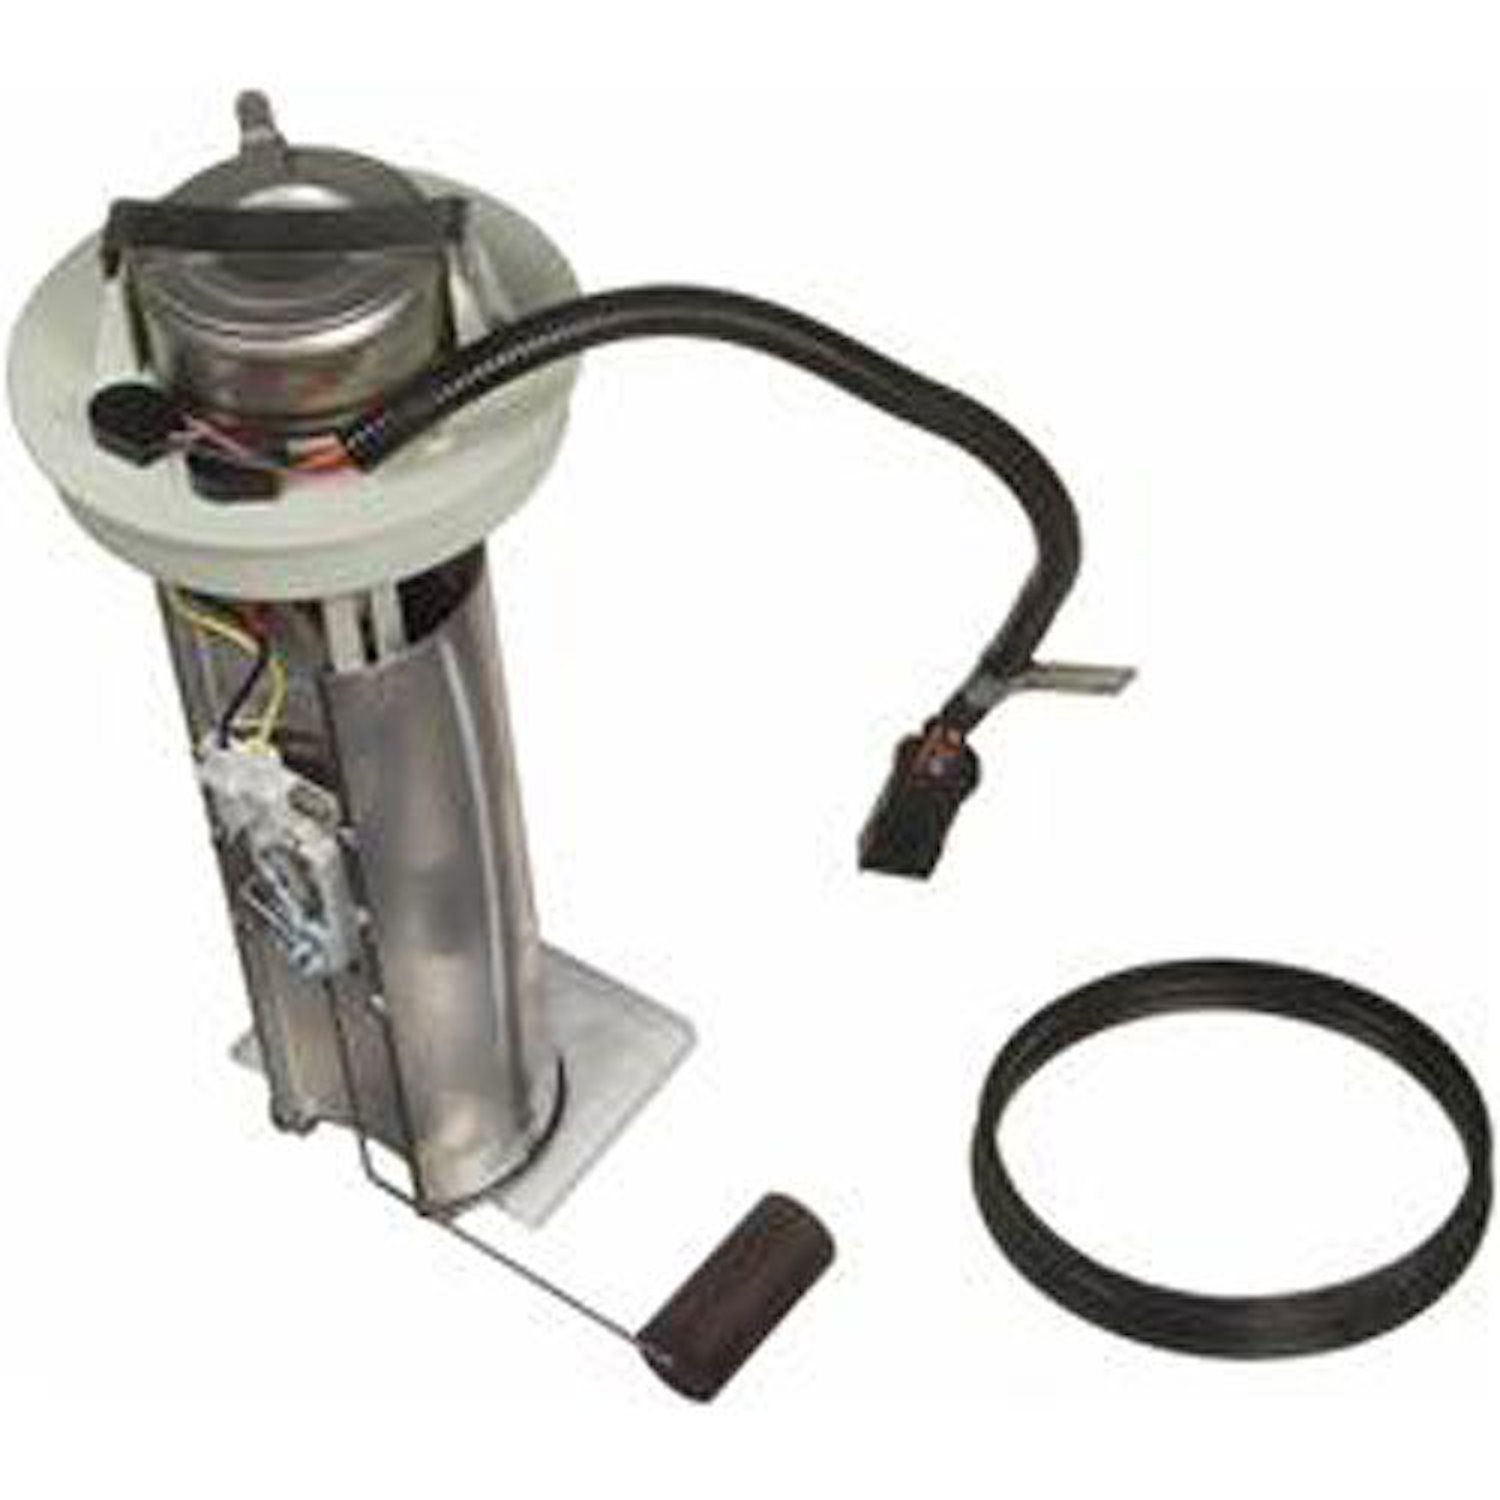 OE Chrysler/Dodge/Jeep Replacement Electric Fuel Pump Module